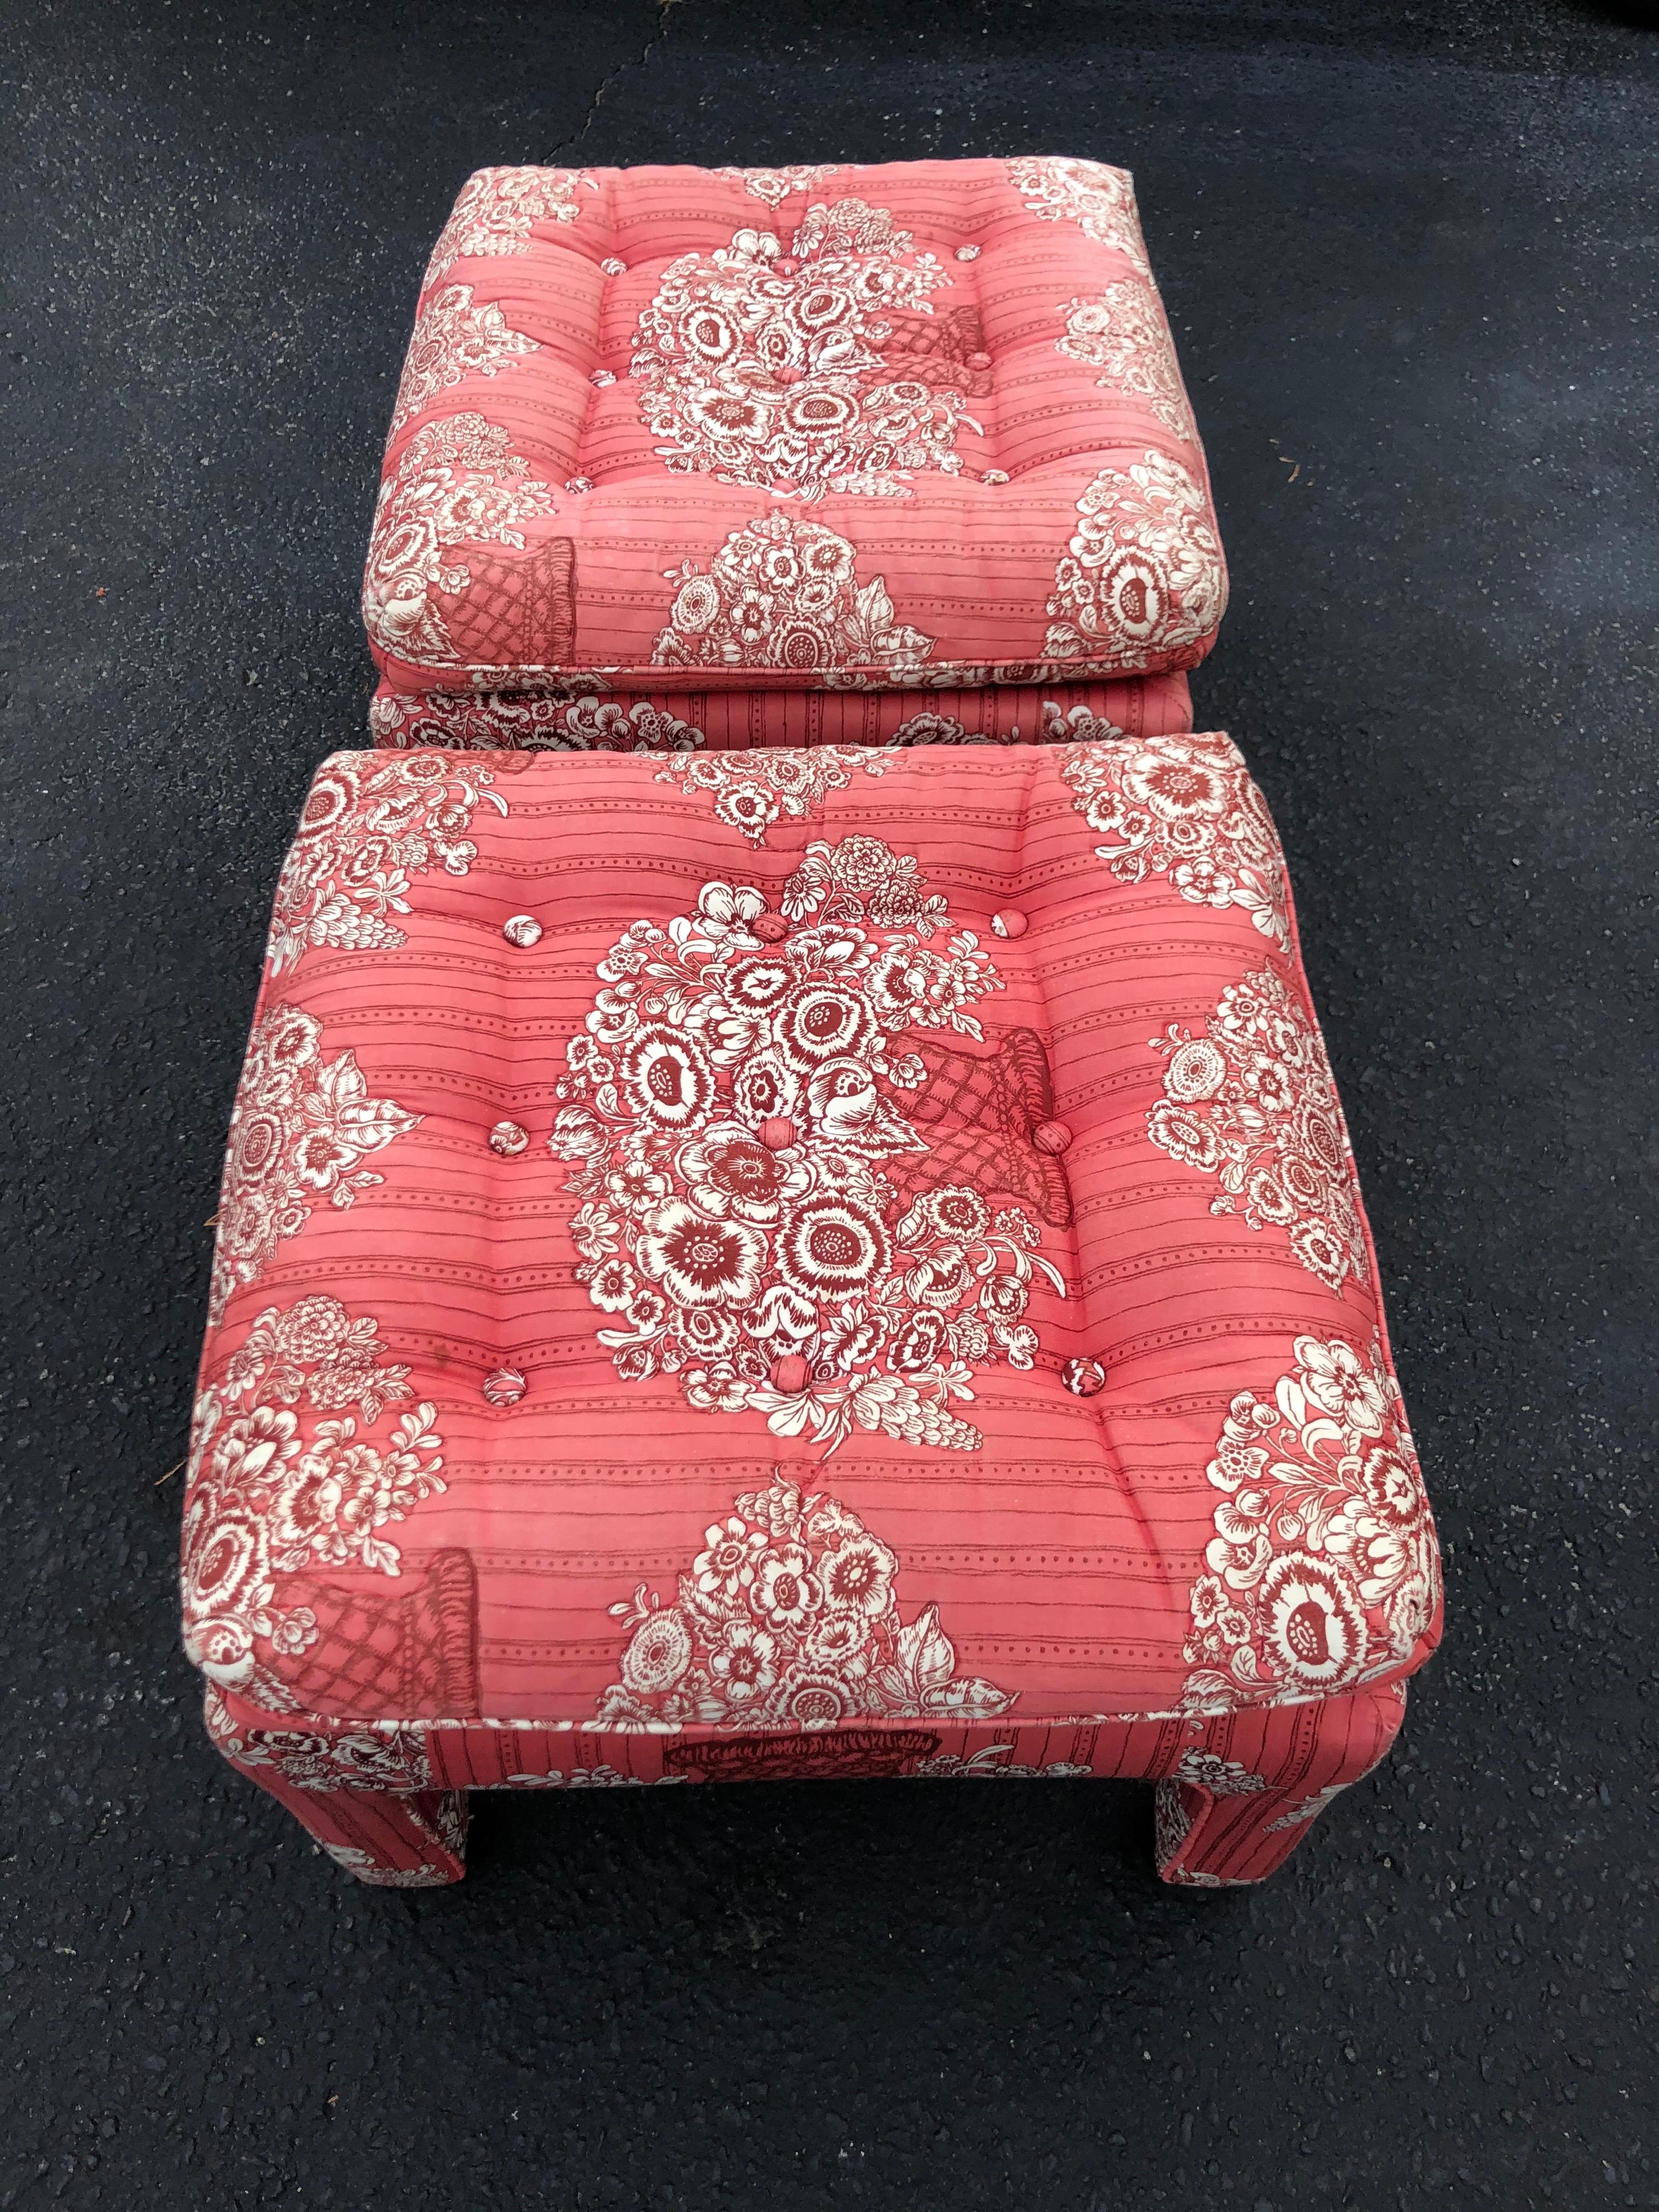 Pair of Petite Wing Back Chairs with Matching Ottomans For Sale 5